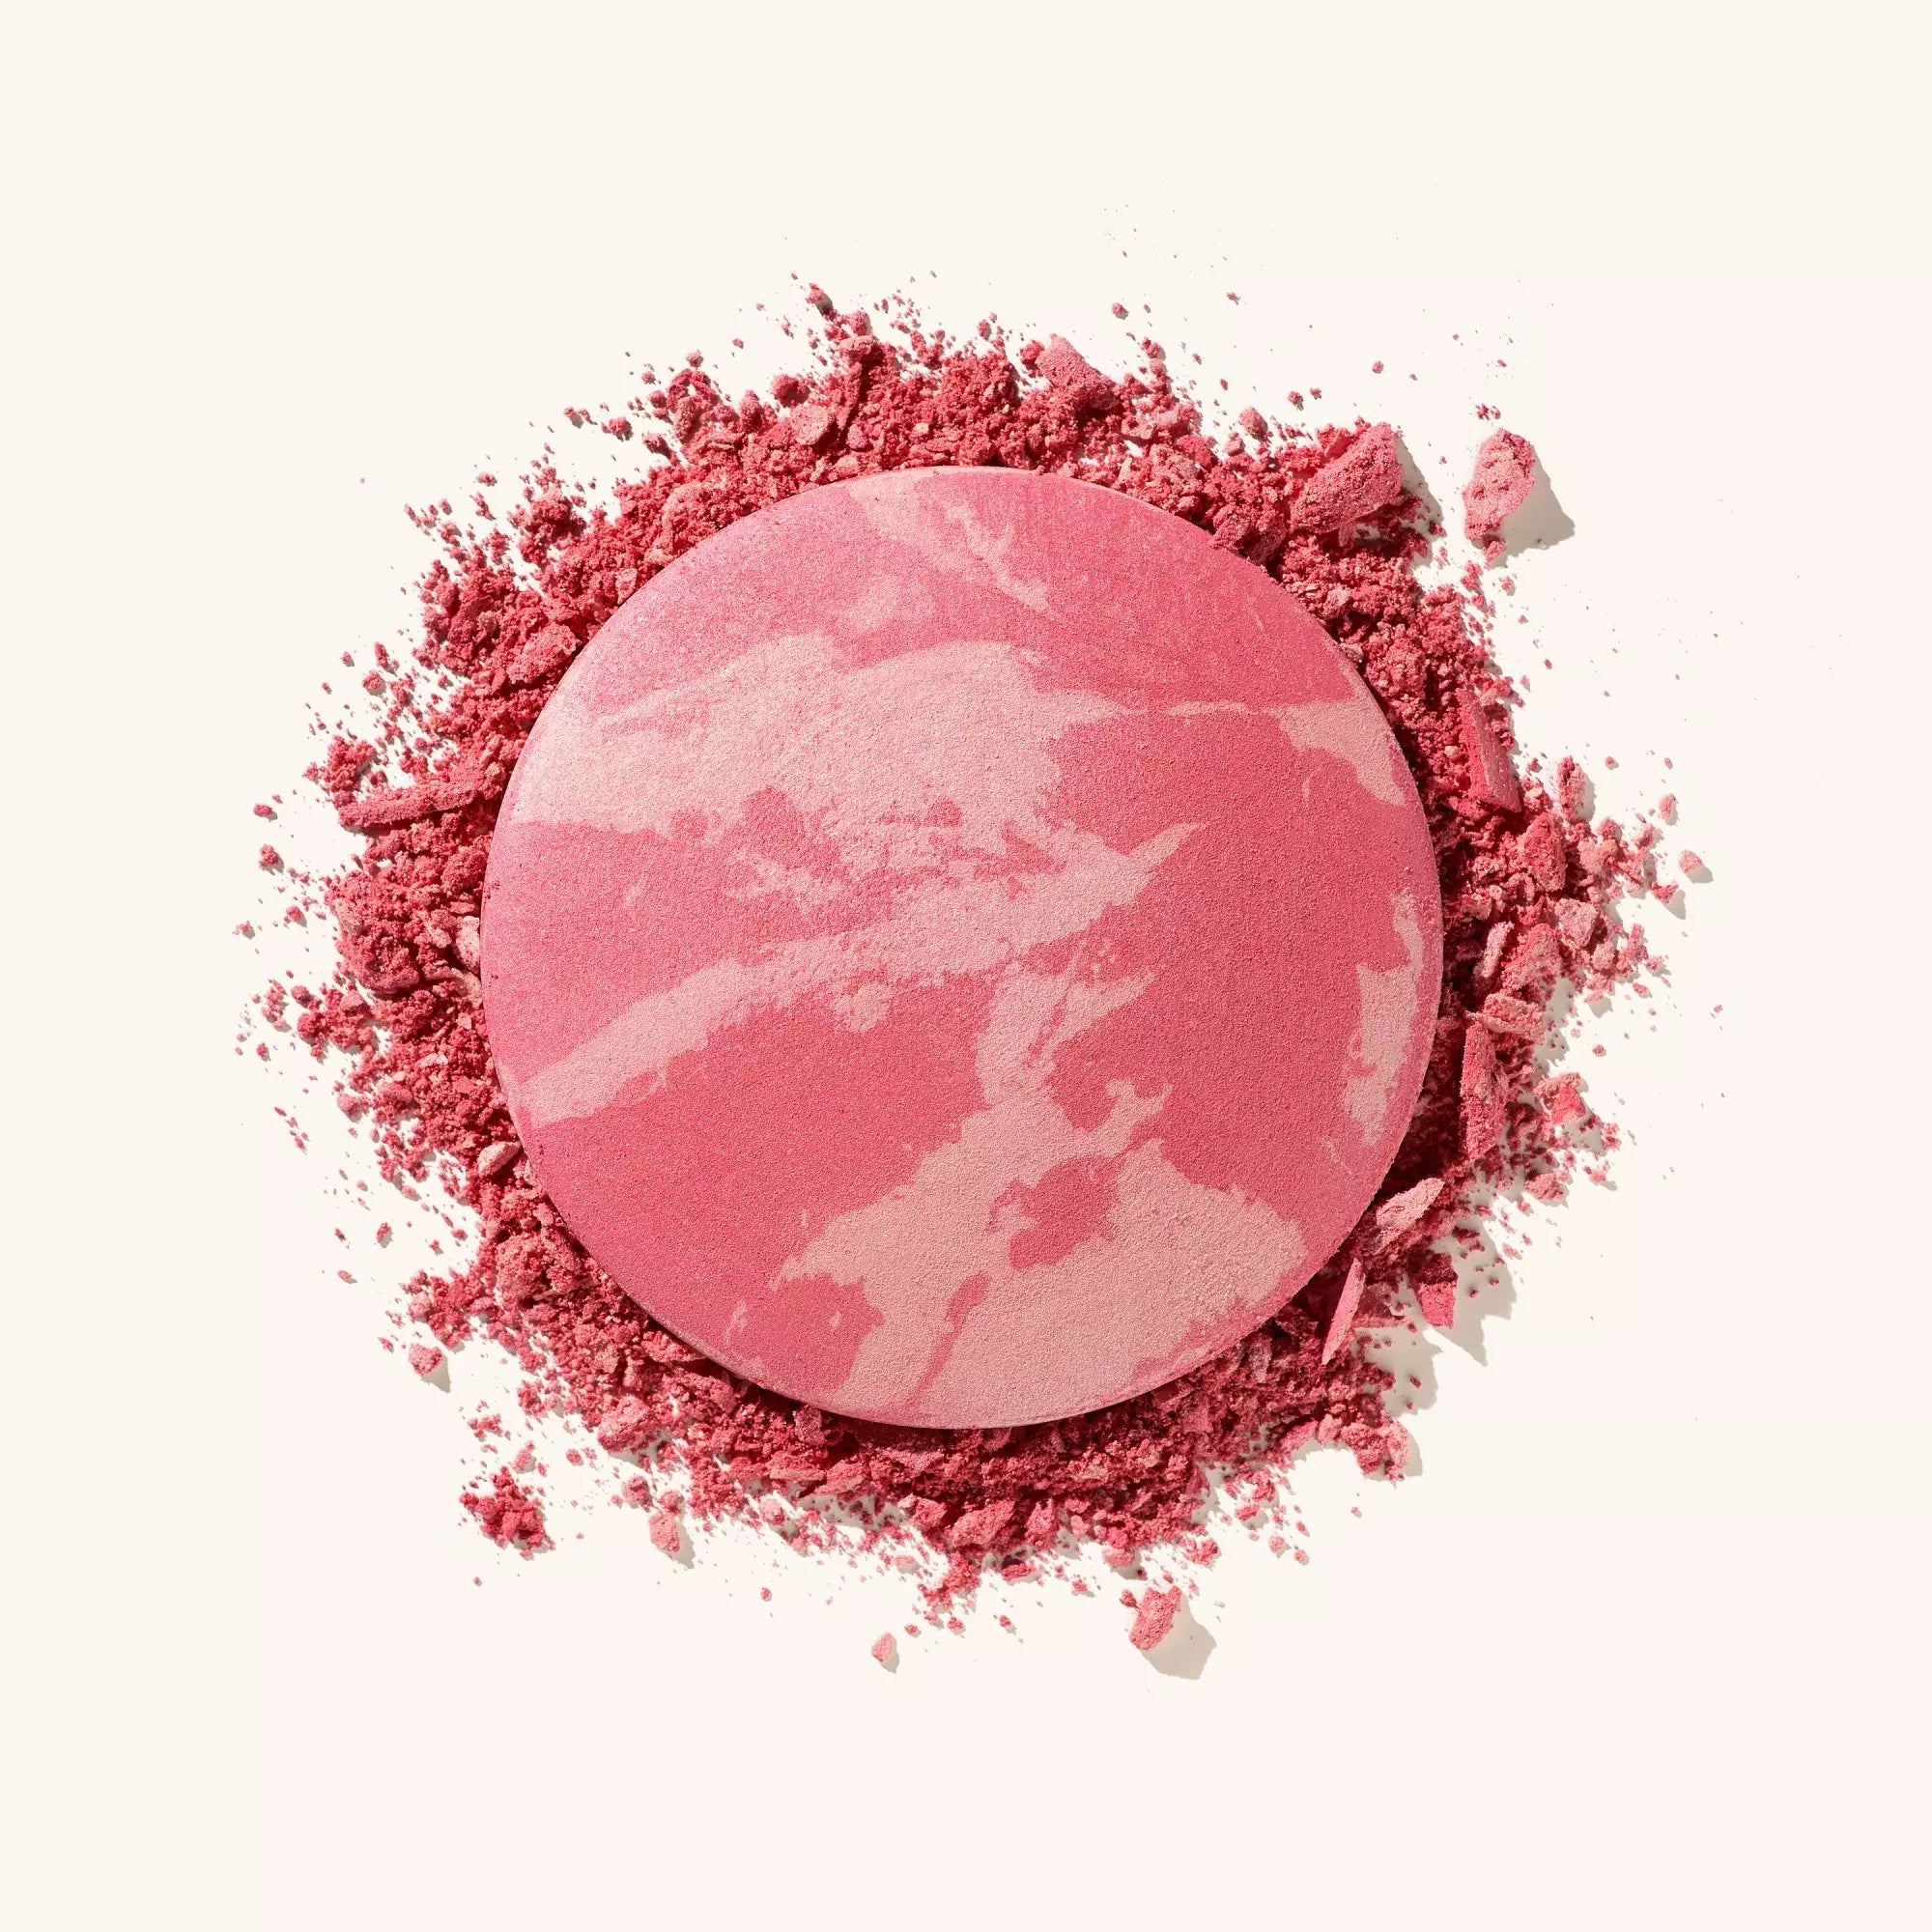 Catrice Cheek Lover Marbled Blusher In Colour 010 Dahlia Blossom